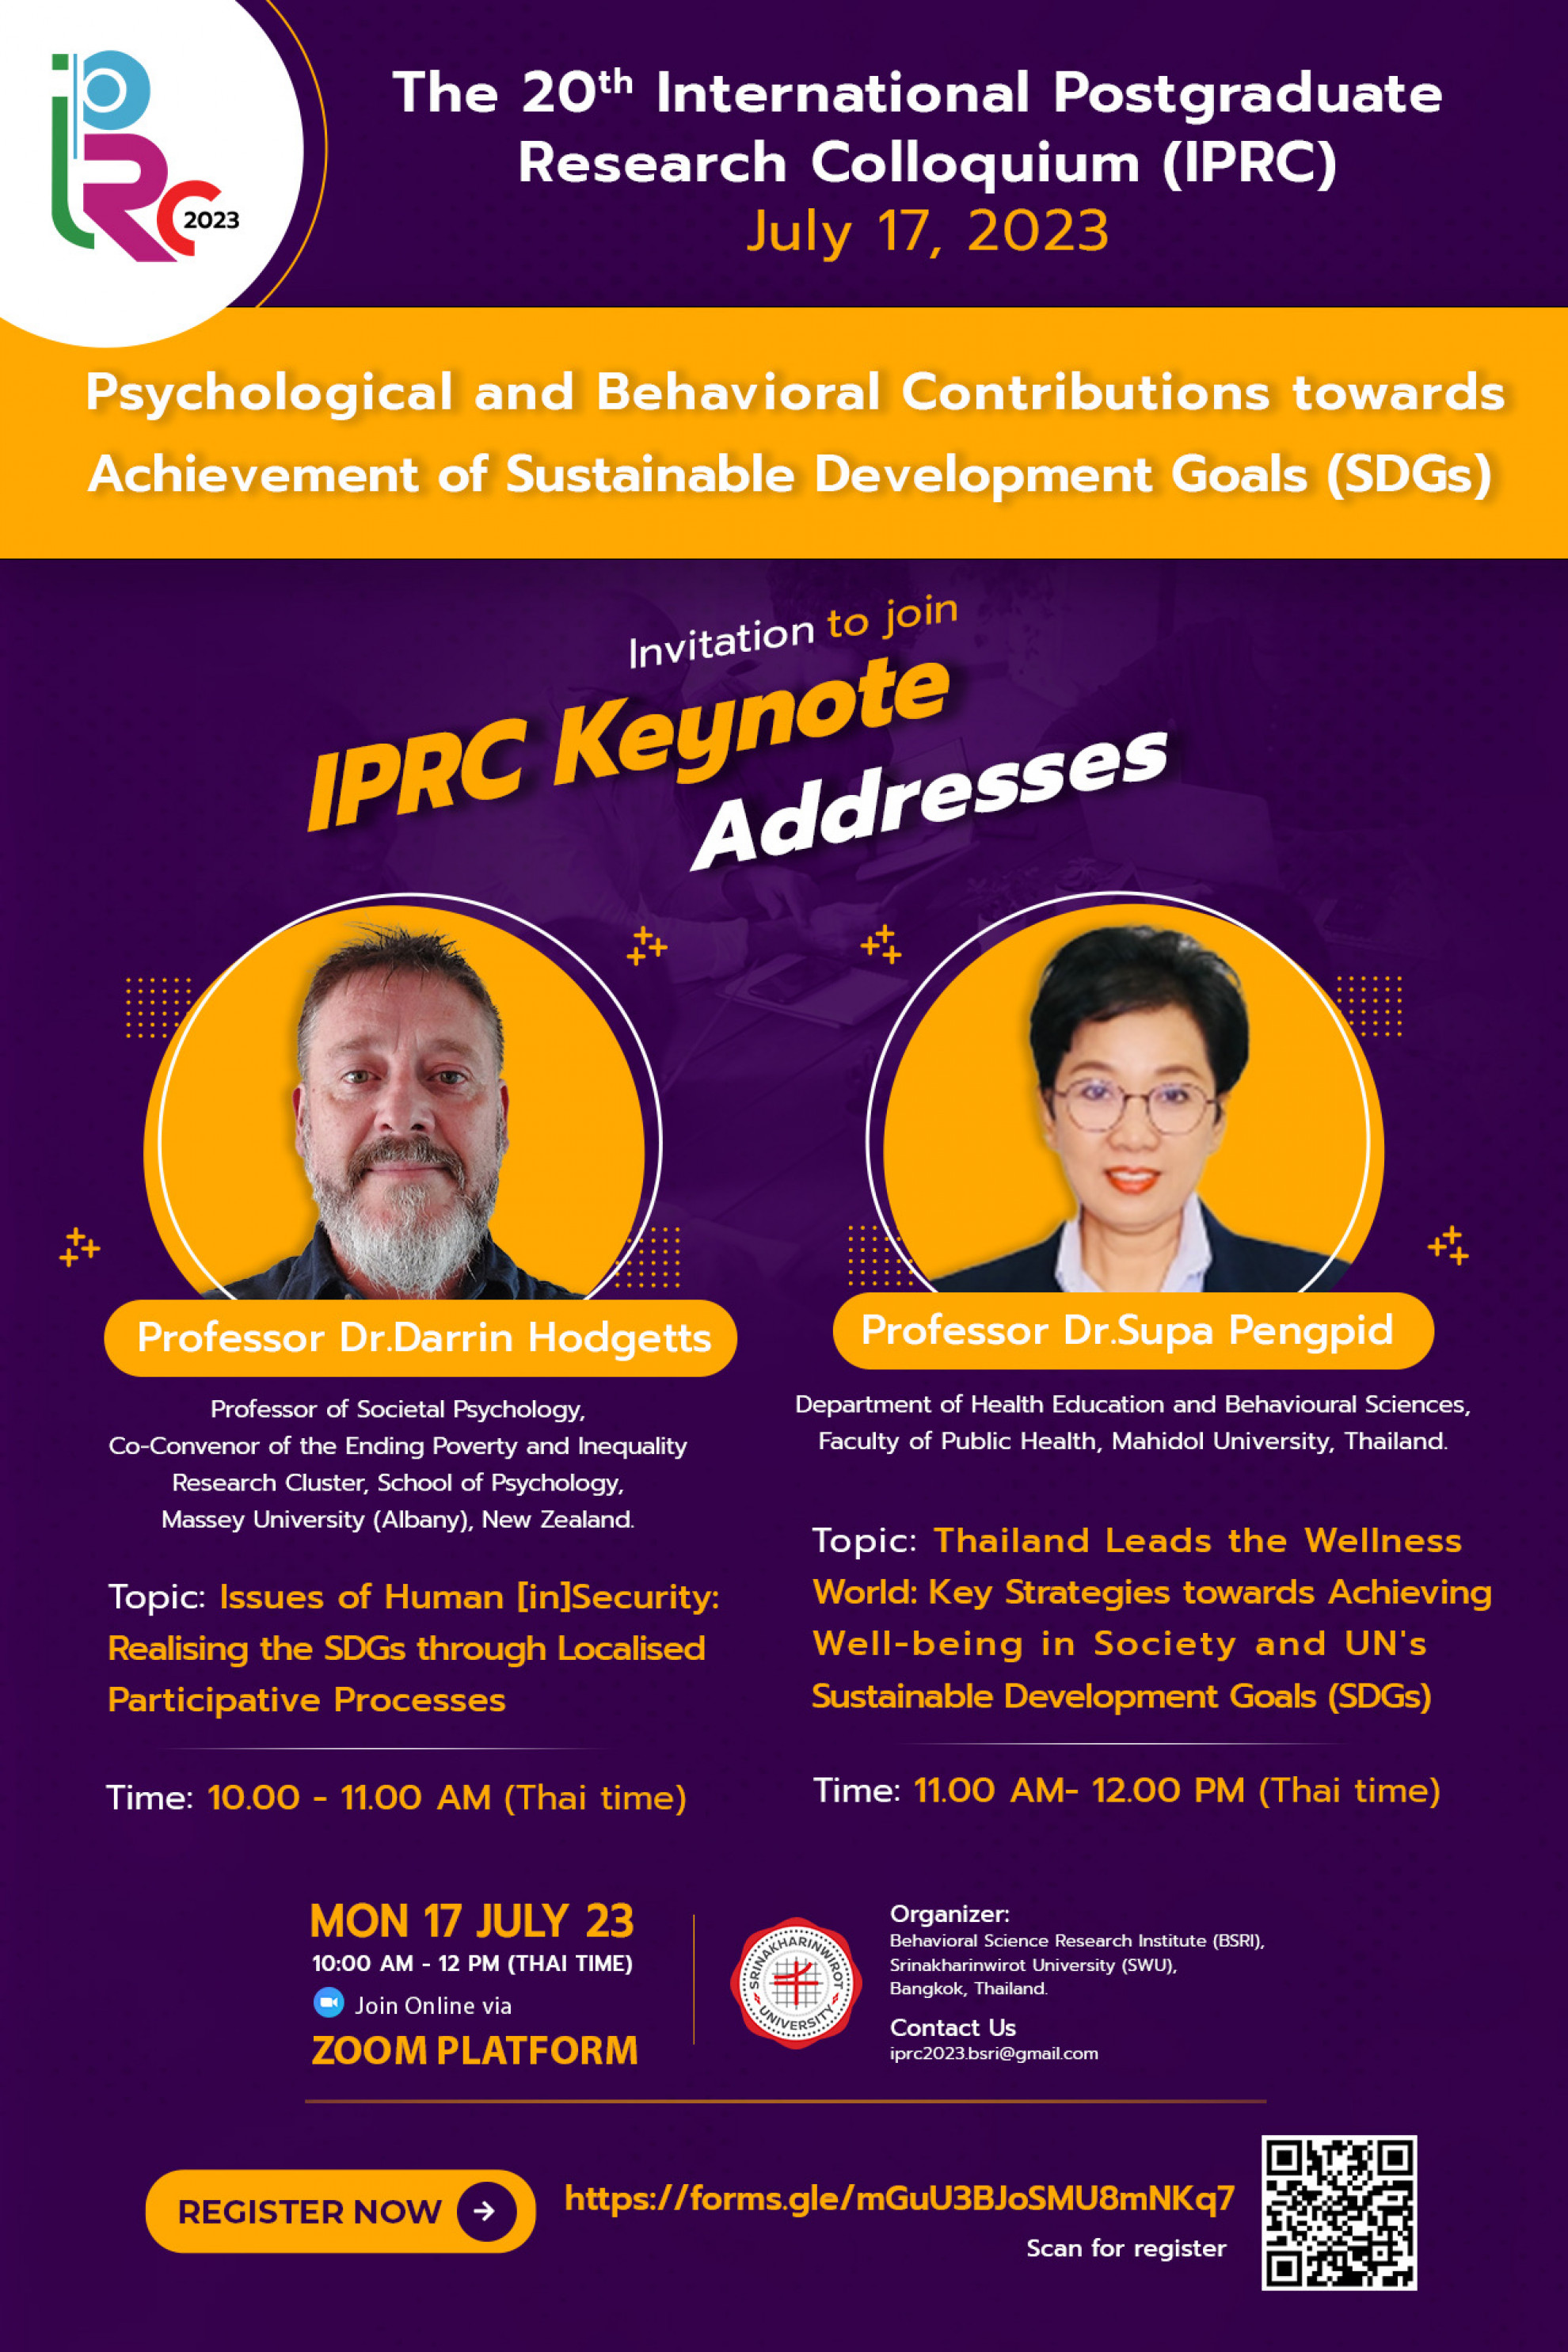 PR conference by Keynote speakers from Massey University NZ and Mahidol University, Thailand top SDGs publications.